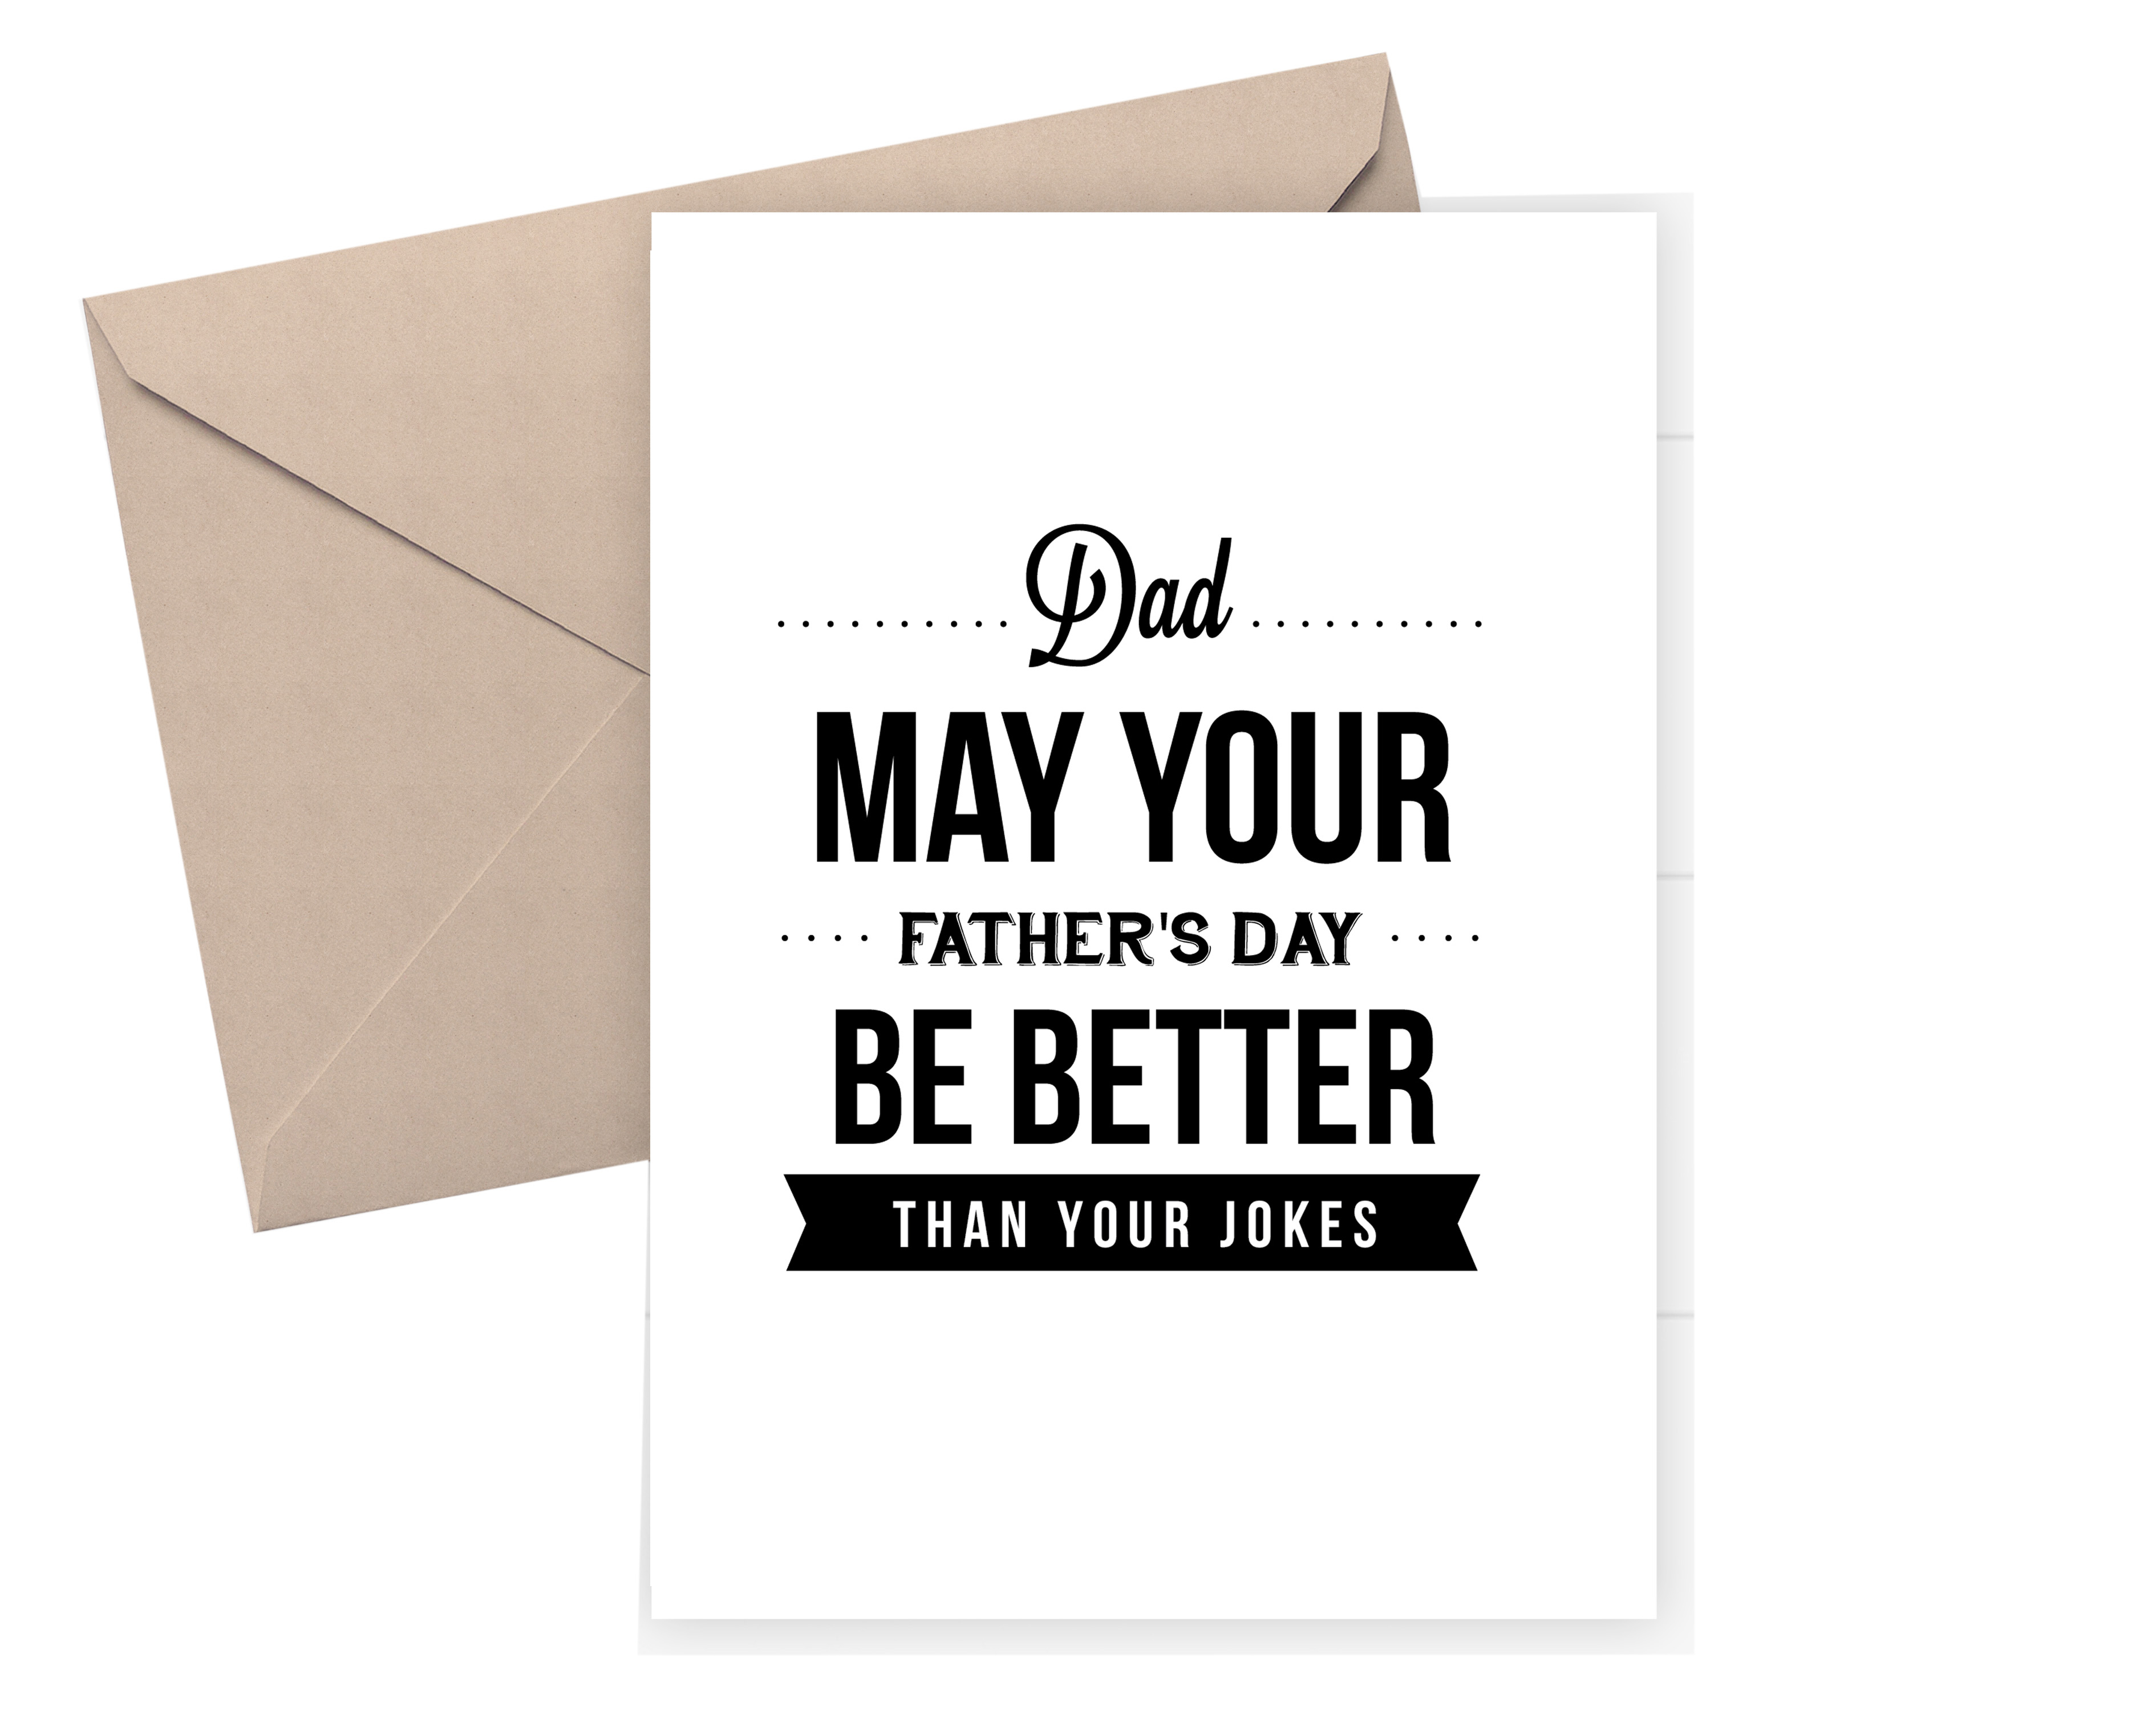 Father's Day Card - May your Father's day be better than your jokes. Father's Day Gifts & Present Ideas